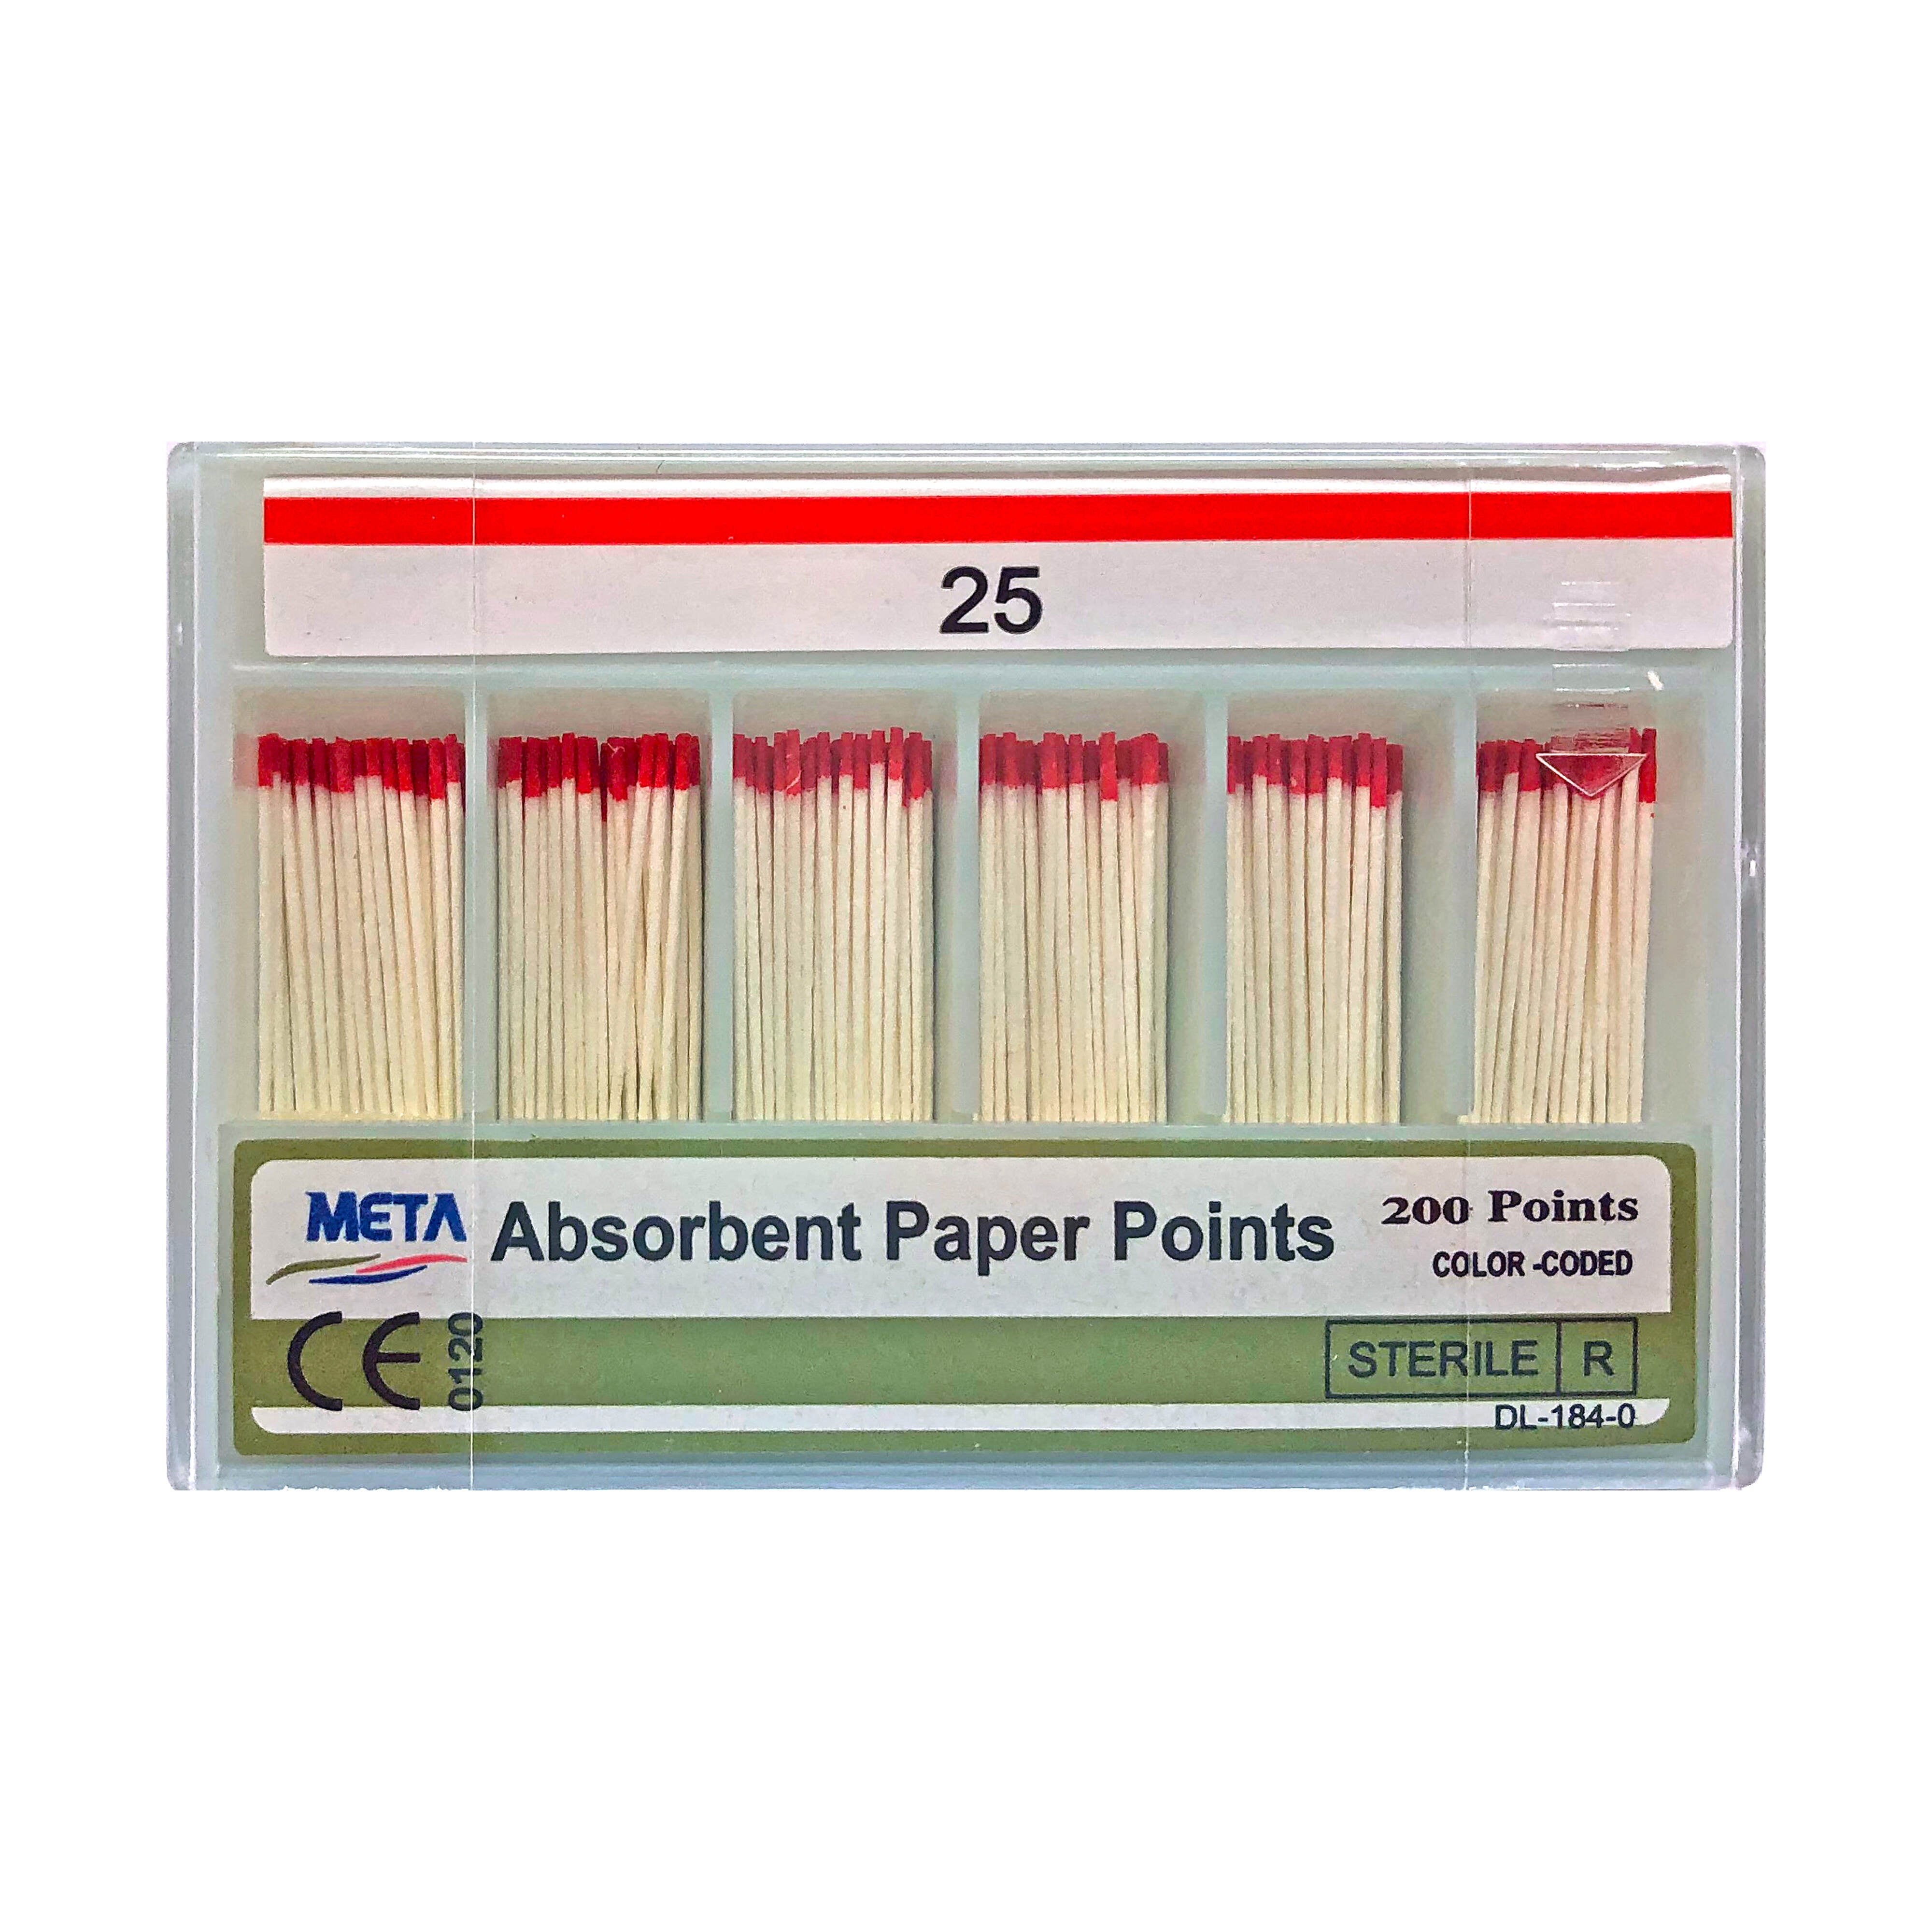 Absorbent Paperpoints - Spillproof Slide Box